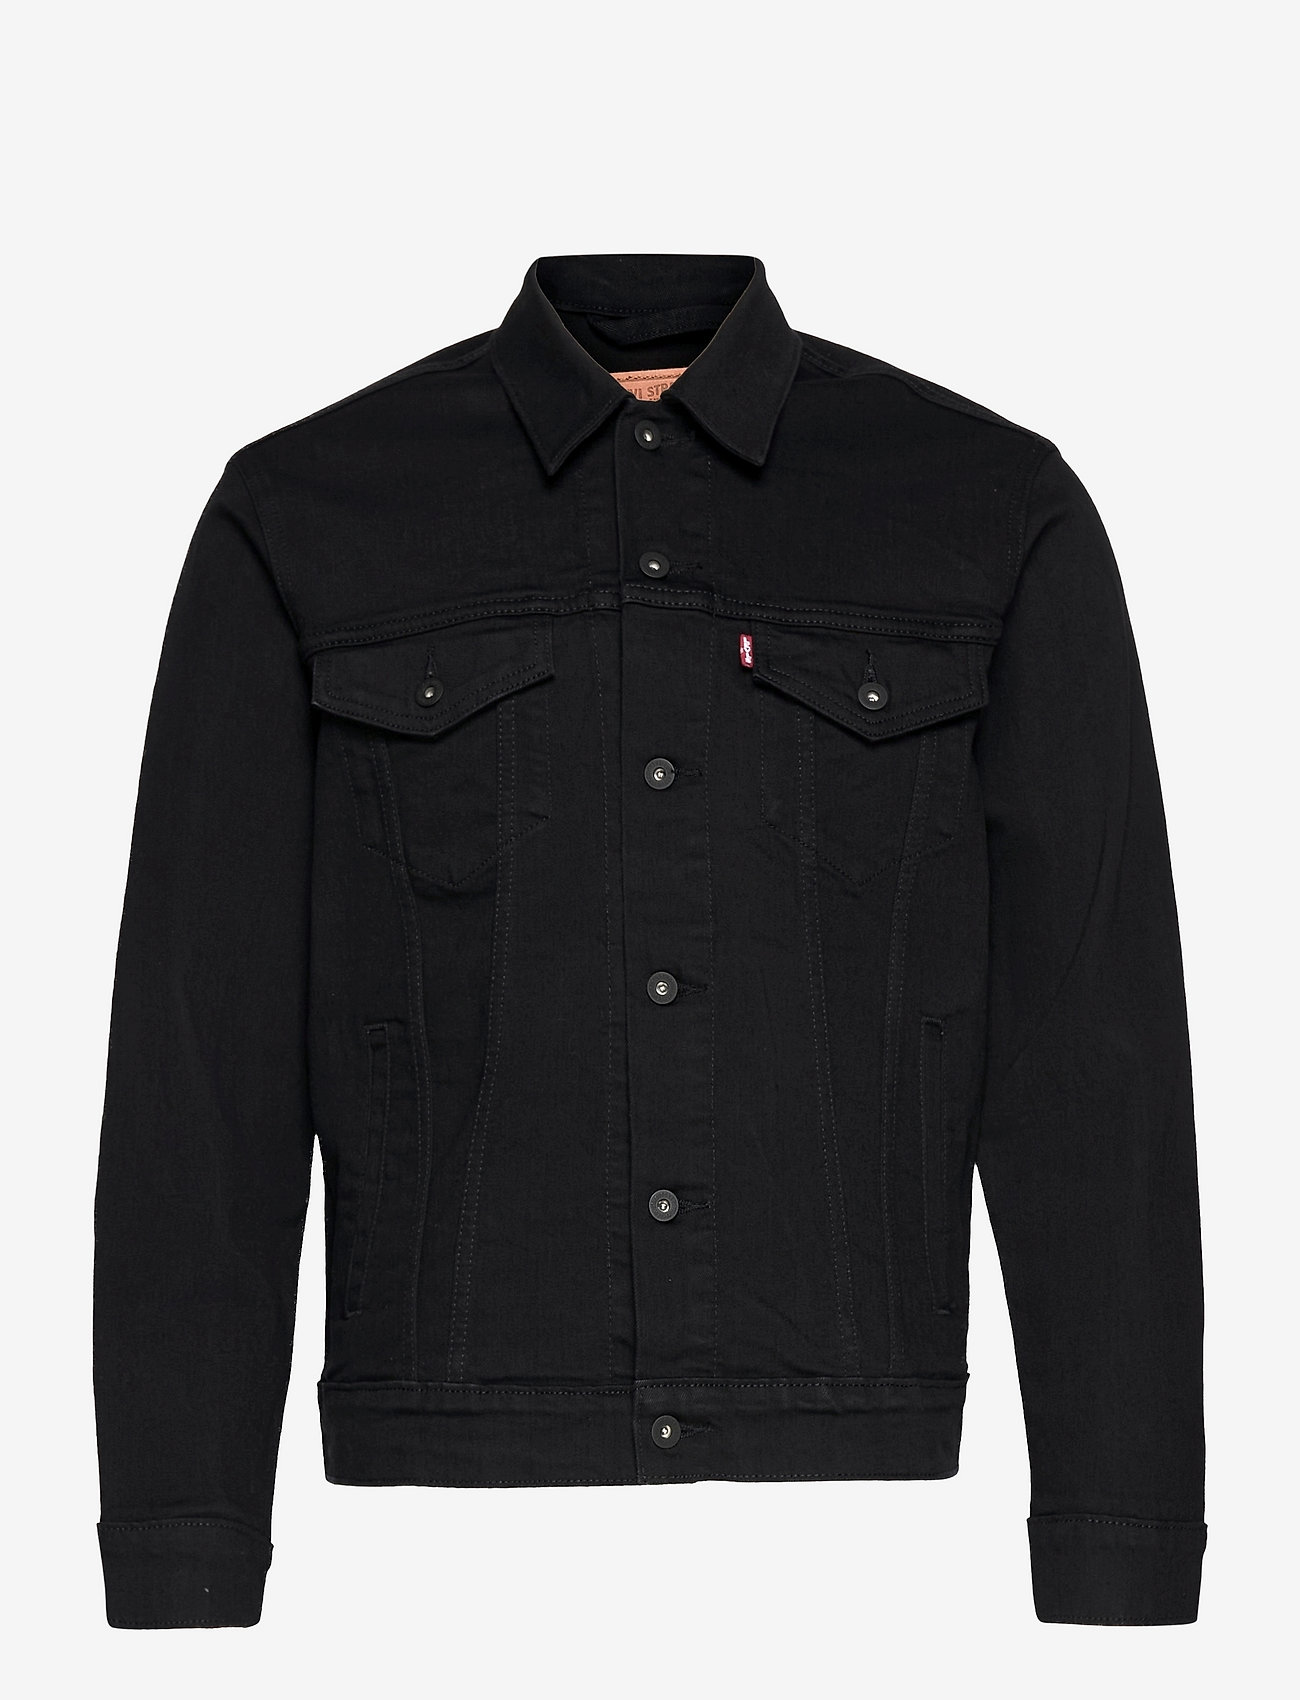 LEVI´S Men The Trucker Jacket Dark Horse  €. Buy Outerwear from LEVI´S  Men online at . Fast delivery and easy returns